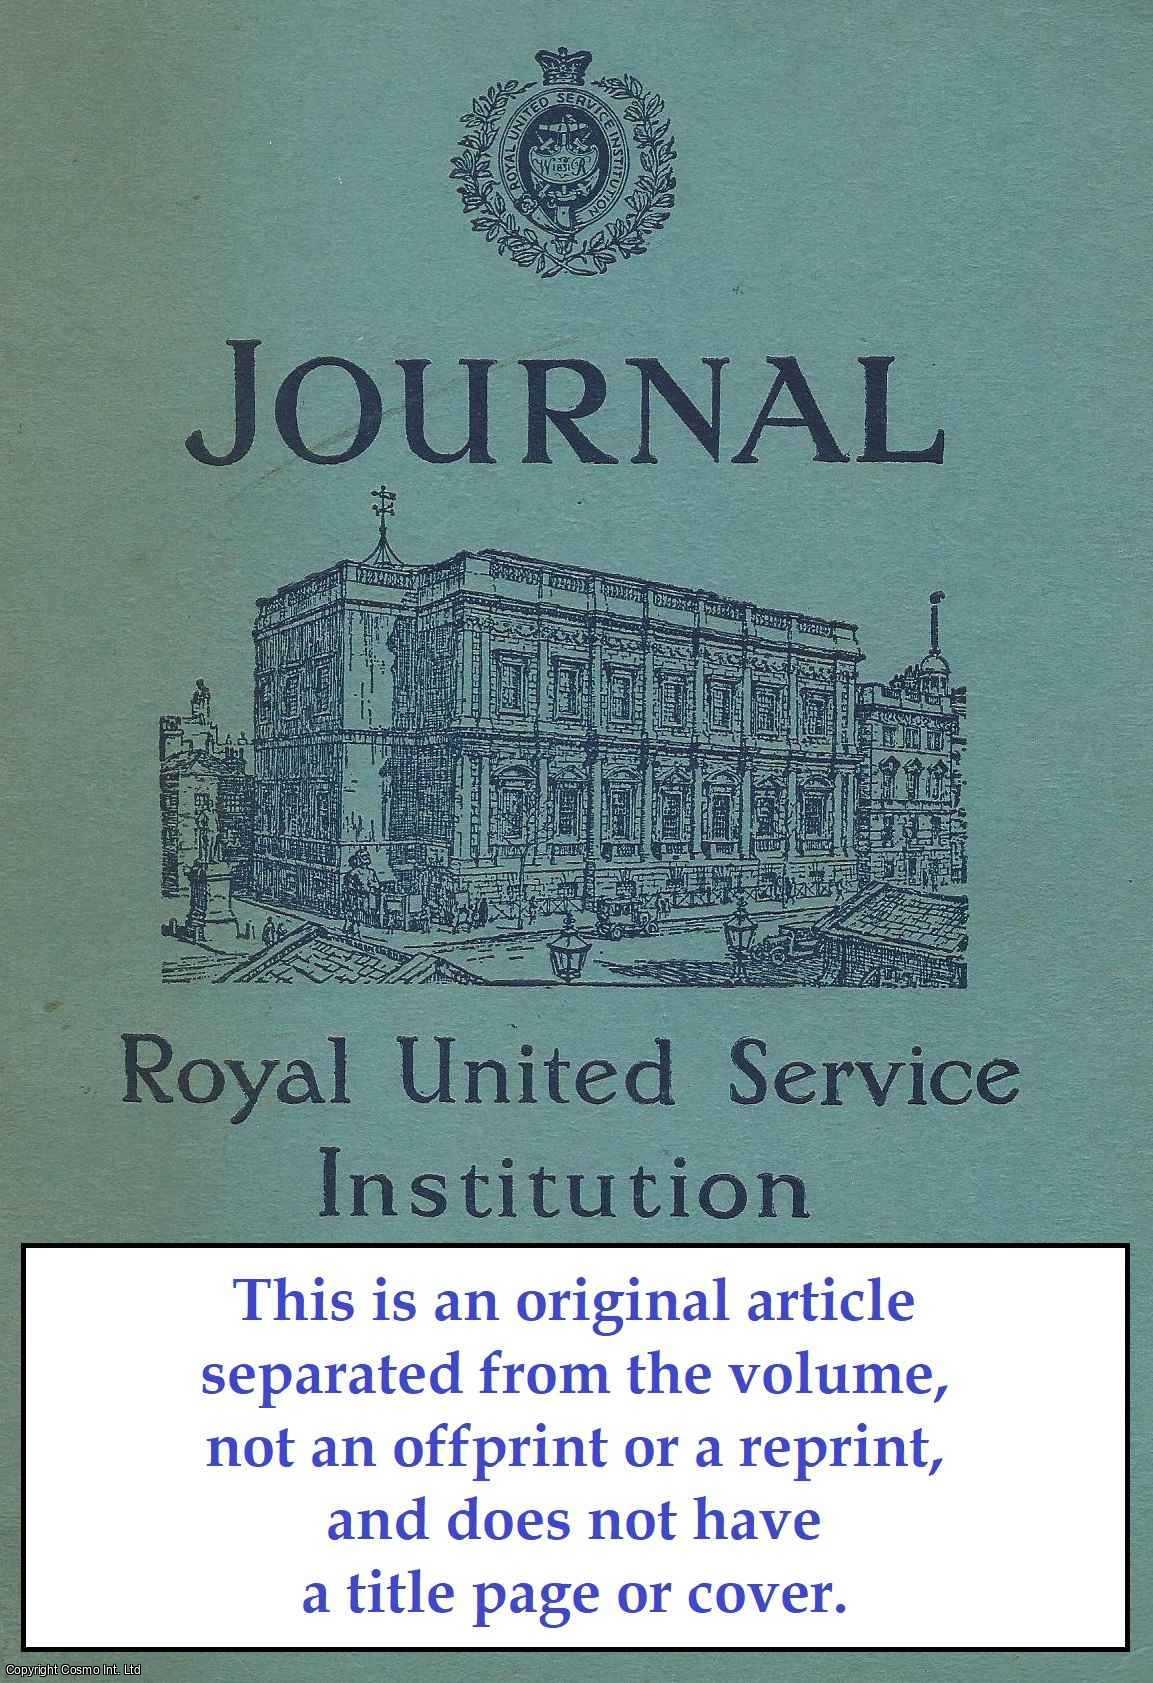 J. Enoch Powell - An Army in Being. An original article from The Royal United Service Institution Journal, 1967.